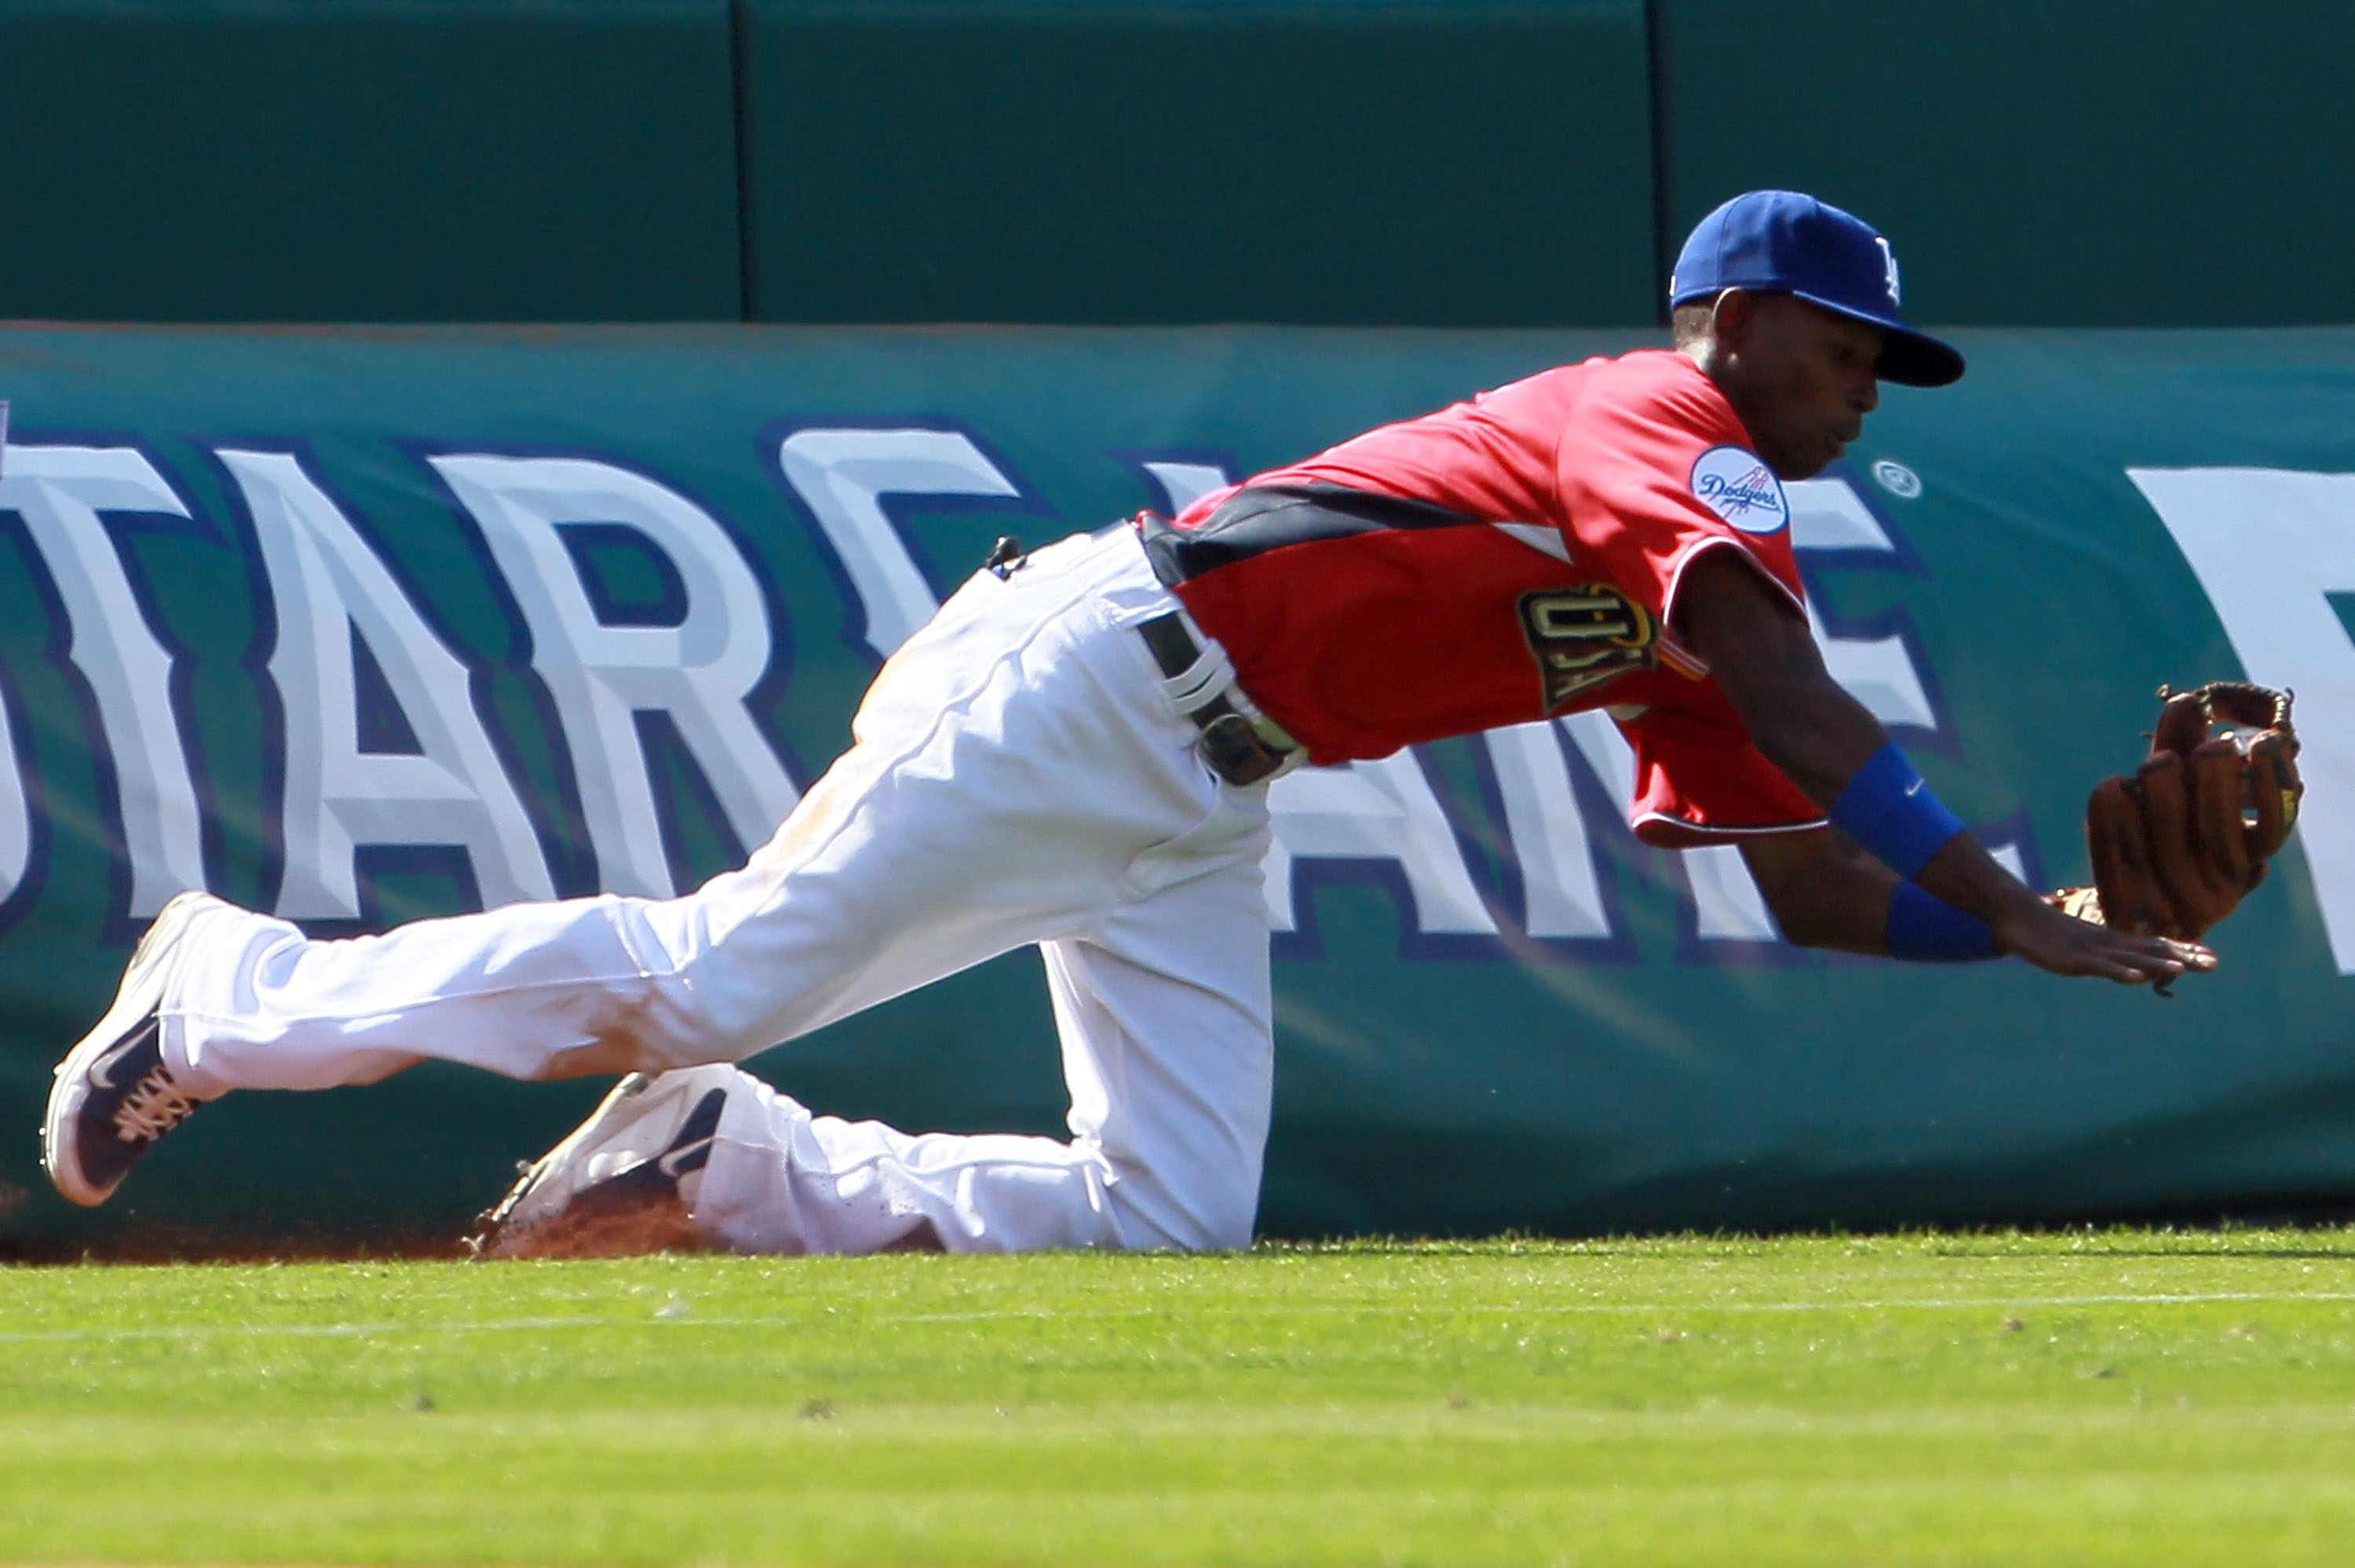 ANAHEIM, CA - JULY 11:  U.S. Futures All-Star Dee Gordon #5 of the Los Angeles Dodgers dives for the ball during the 2010 XM All-Star Futures Game at Angel Stadium of Anaheim on July 11, 2010 in Anaheim, California.  (Photo by Jeff Gross/Getty Images)